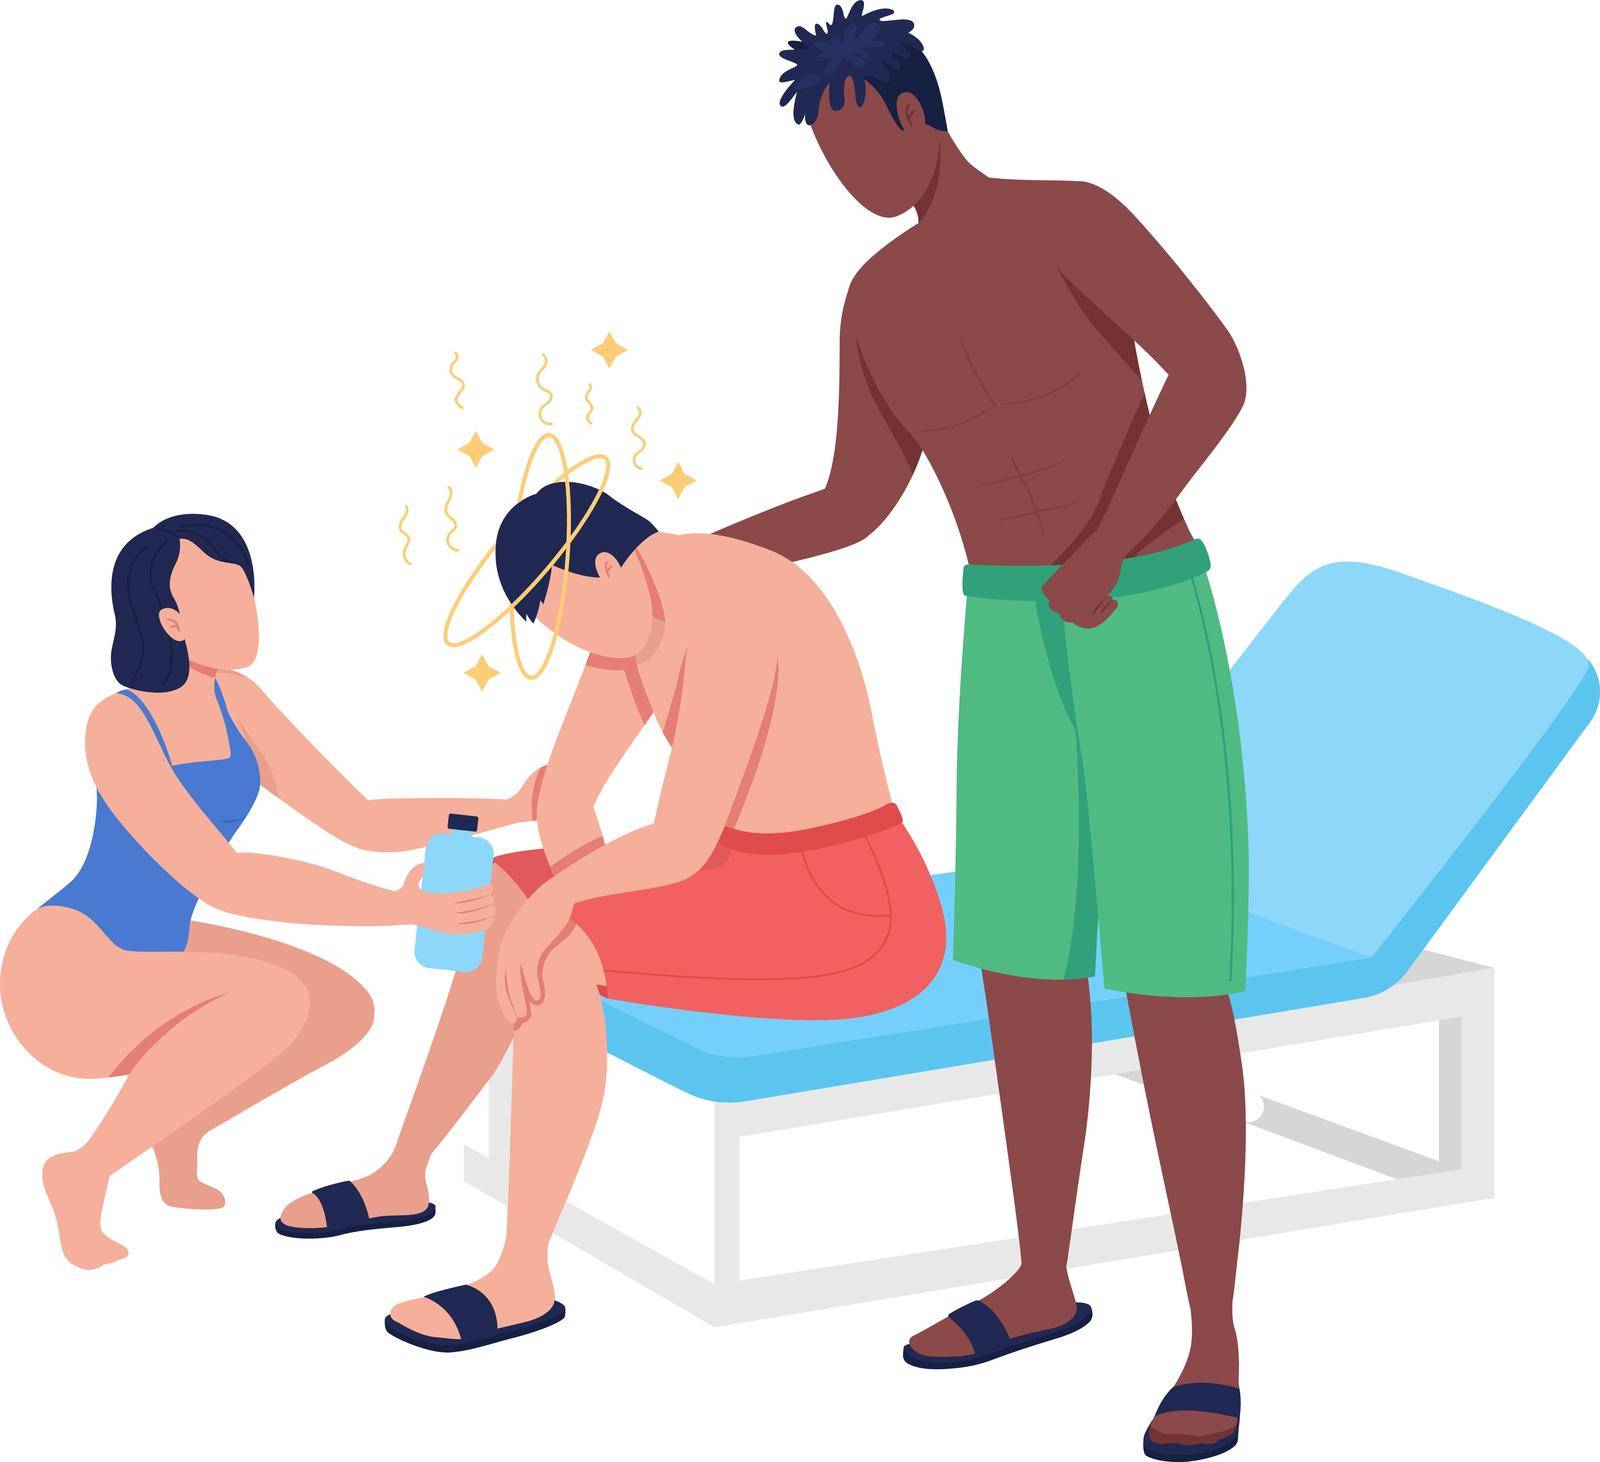 Heatstroke condition semi flat color vector characters. Figures providing first aid. Full body people on white. Hot weather isolated modern cartoon style illustration for graphic design and animation